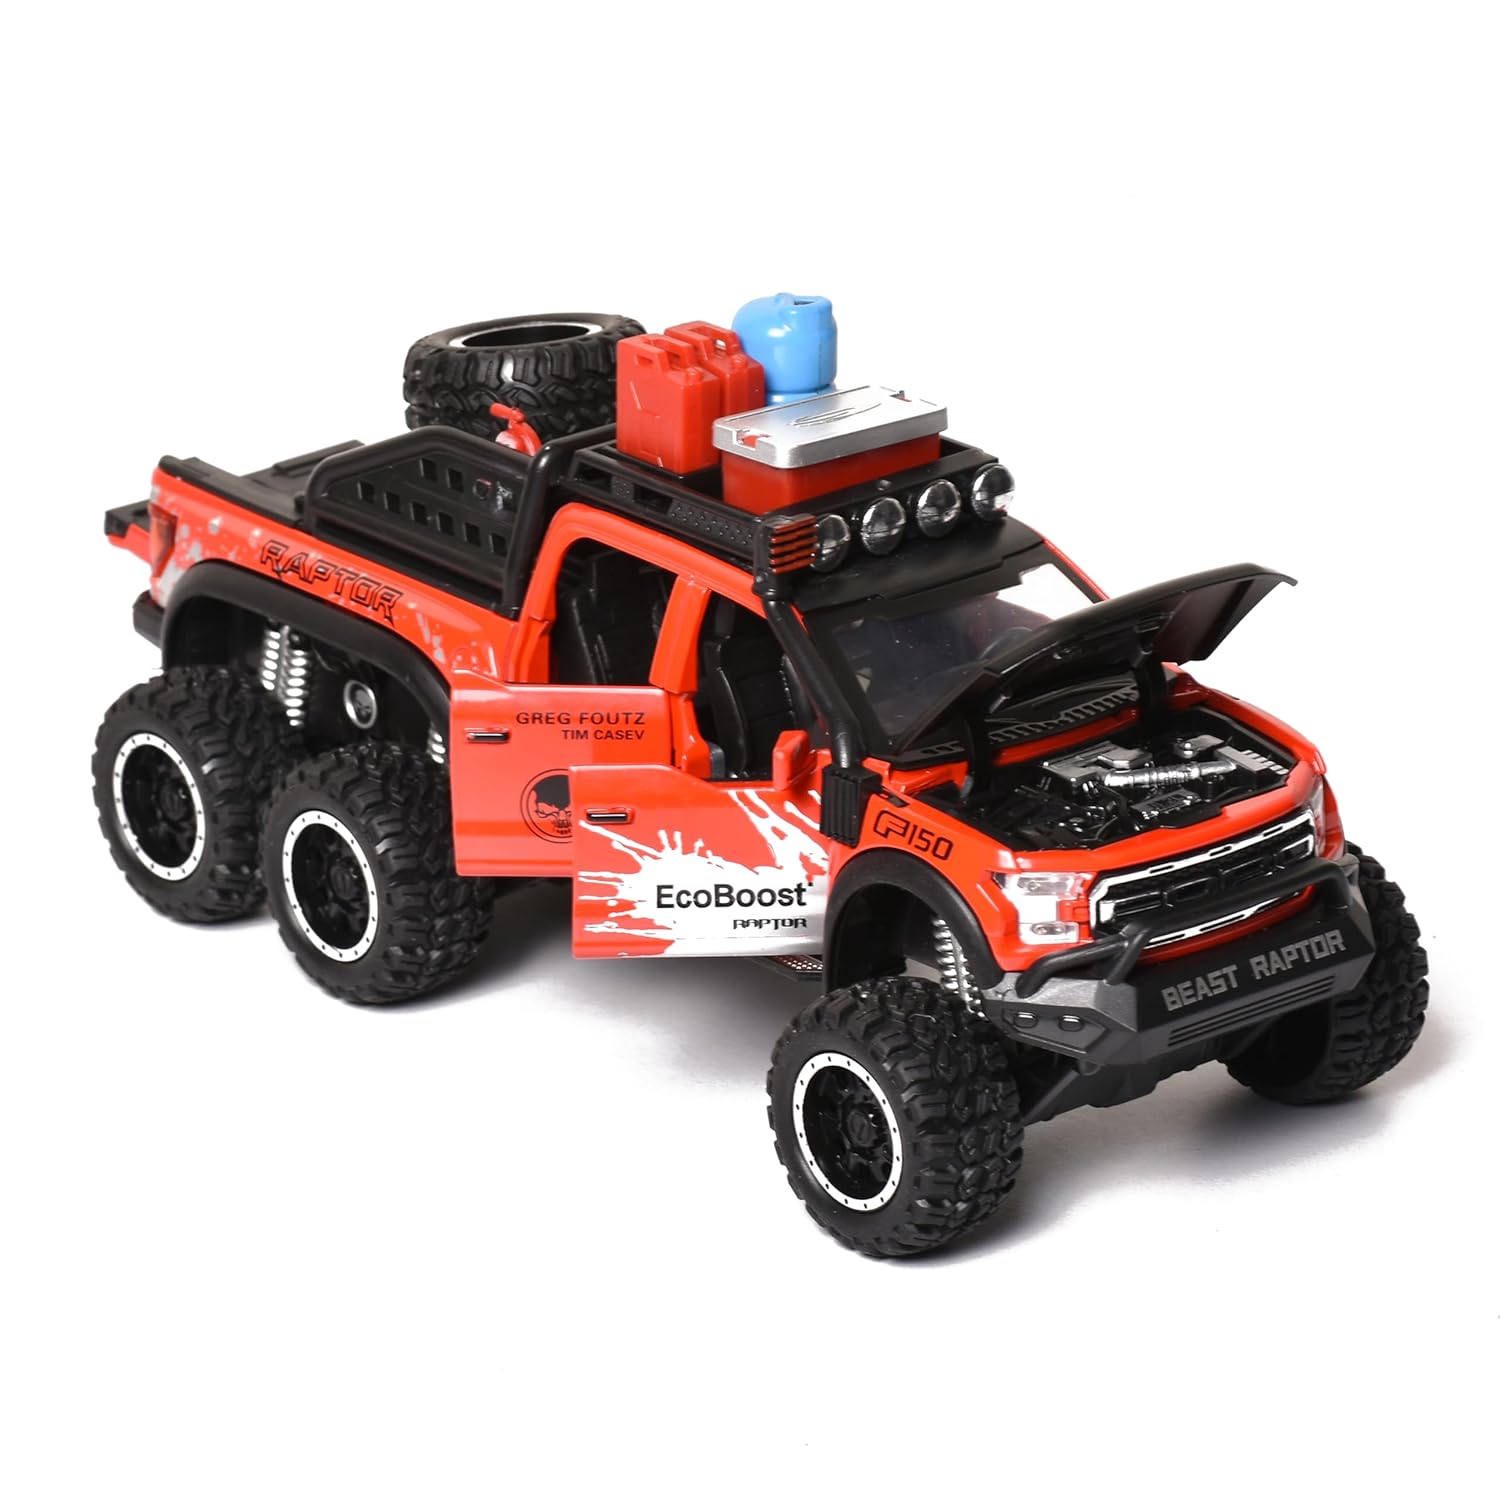 Braintastic F150 Raptor Diecast Spray Metal Model Pickup Car Truck Toys with Doors Open Sound and Light for Kids Age 3+ Year